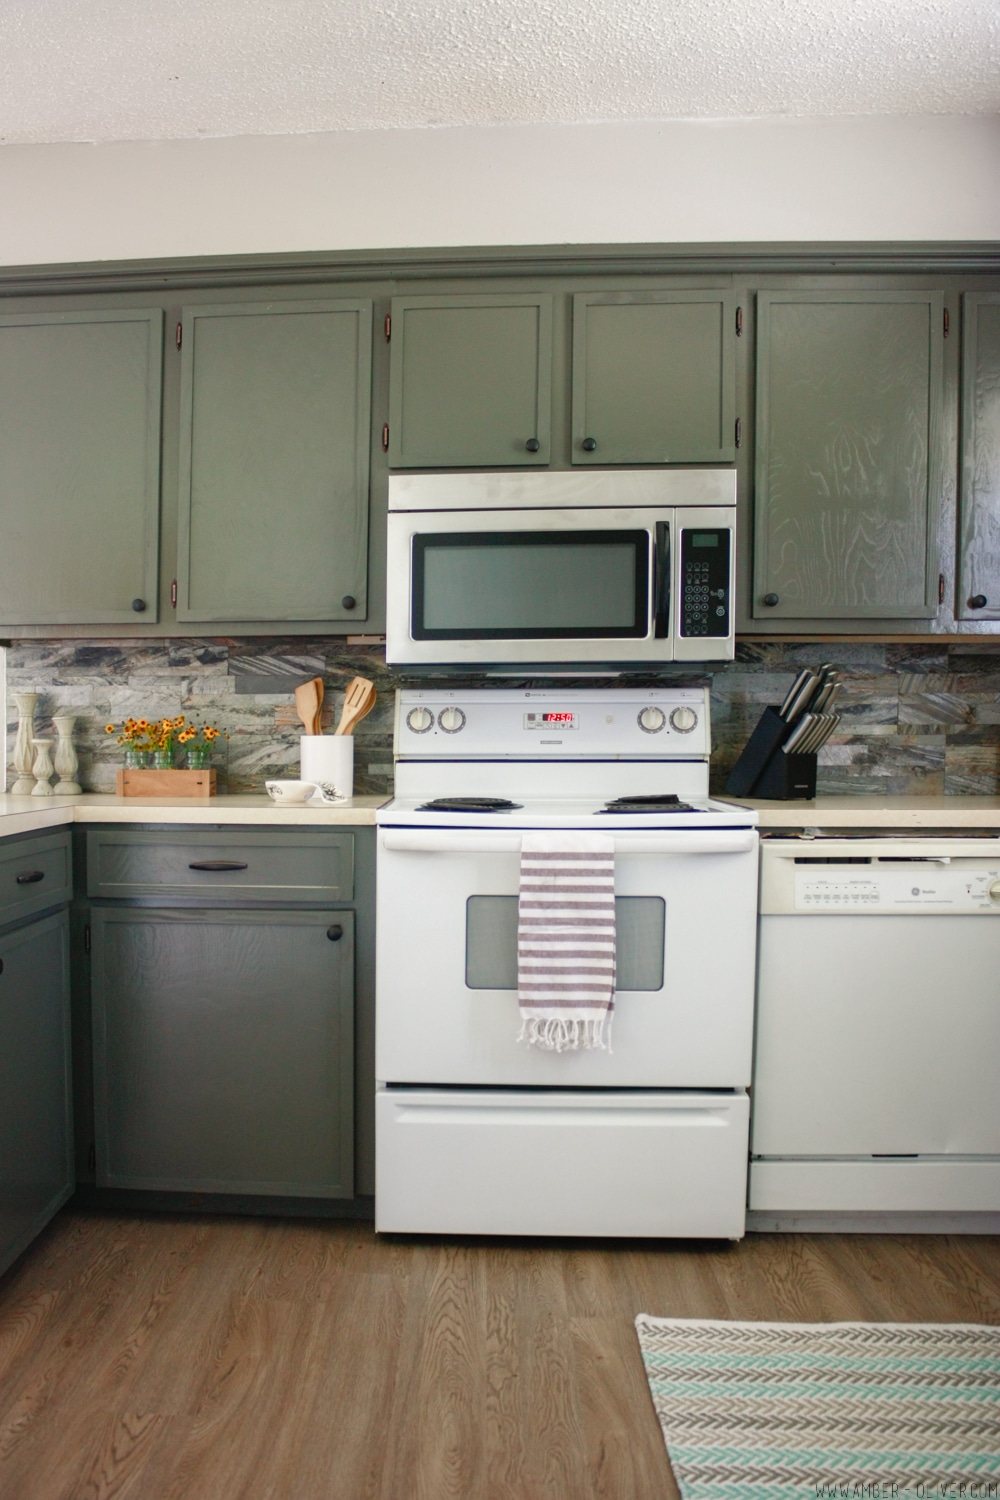 Kitchen remodel on a budget! Dark painted cabinets, peel and stick backsplash, and updated old cabinet doors!